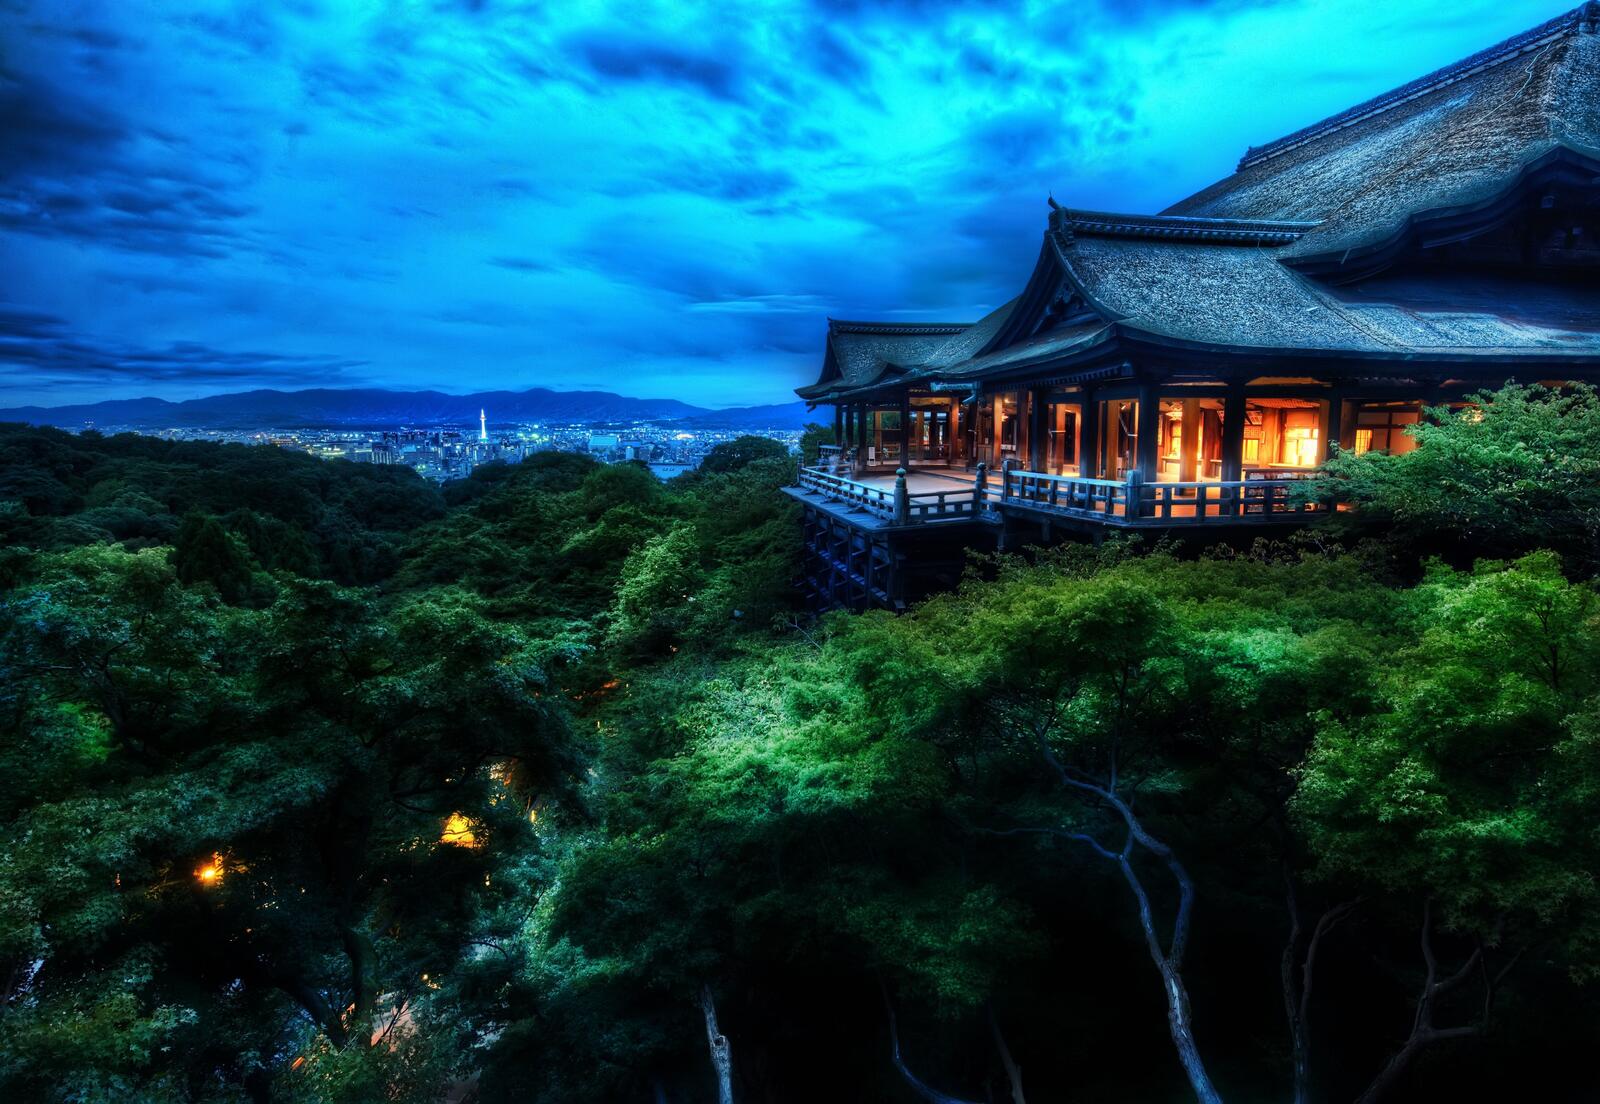 Wallpapers Temple on top of a tree in Kyoto Japan night on the desktop